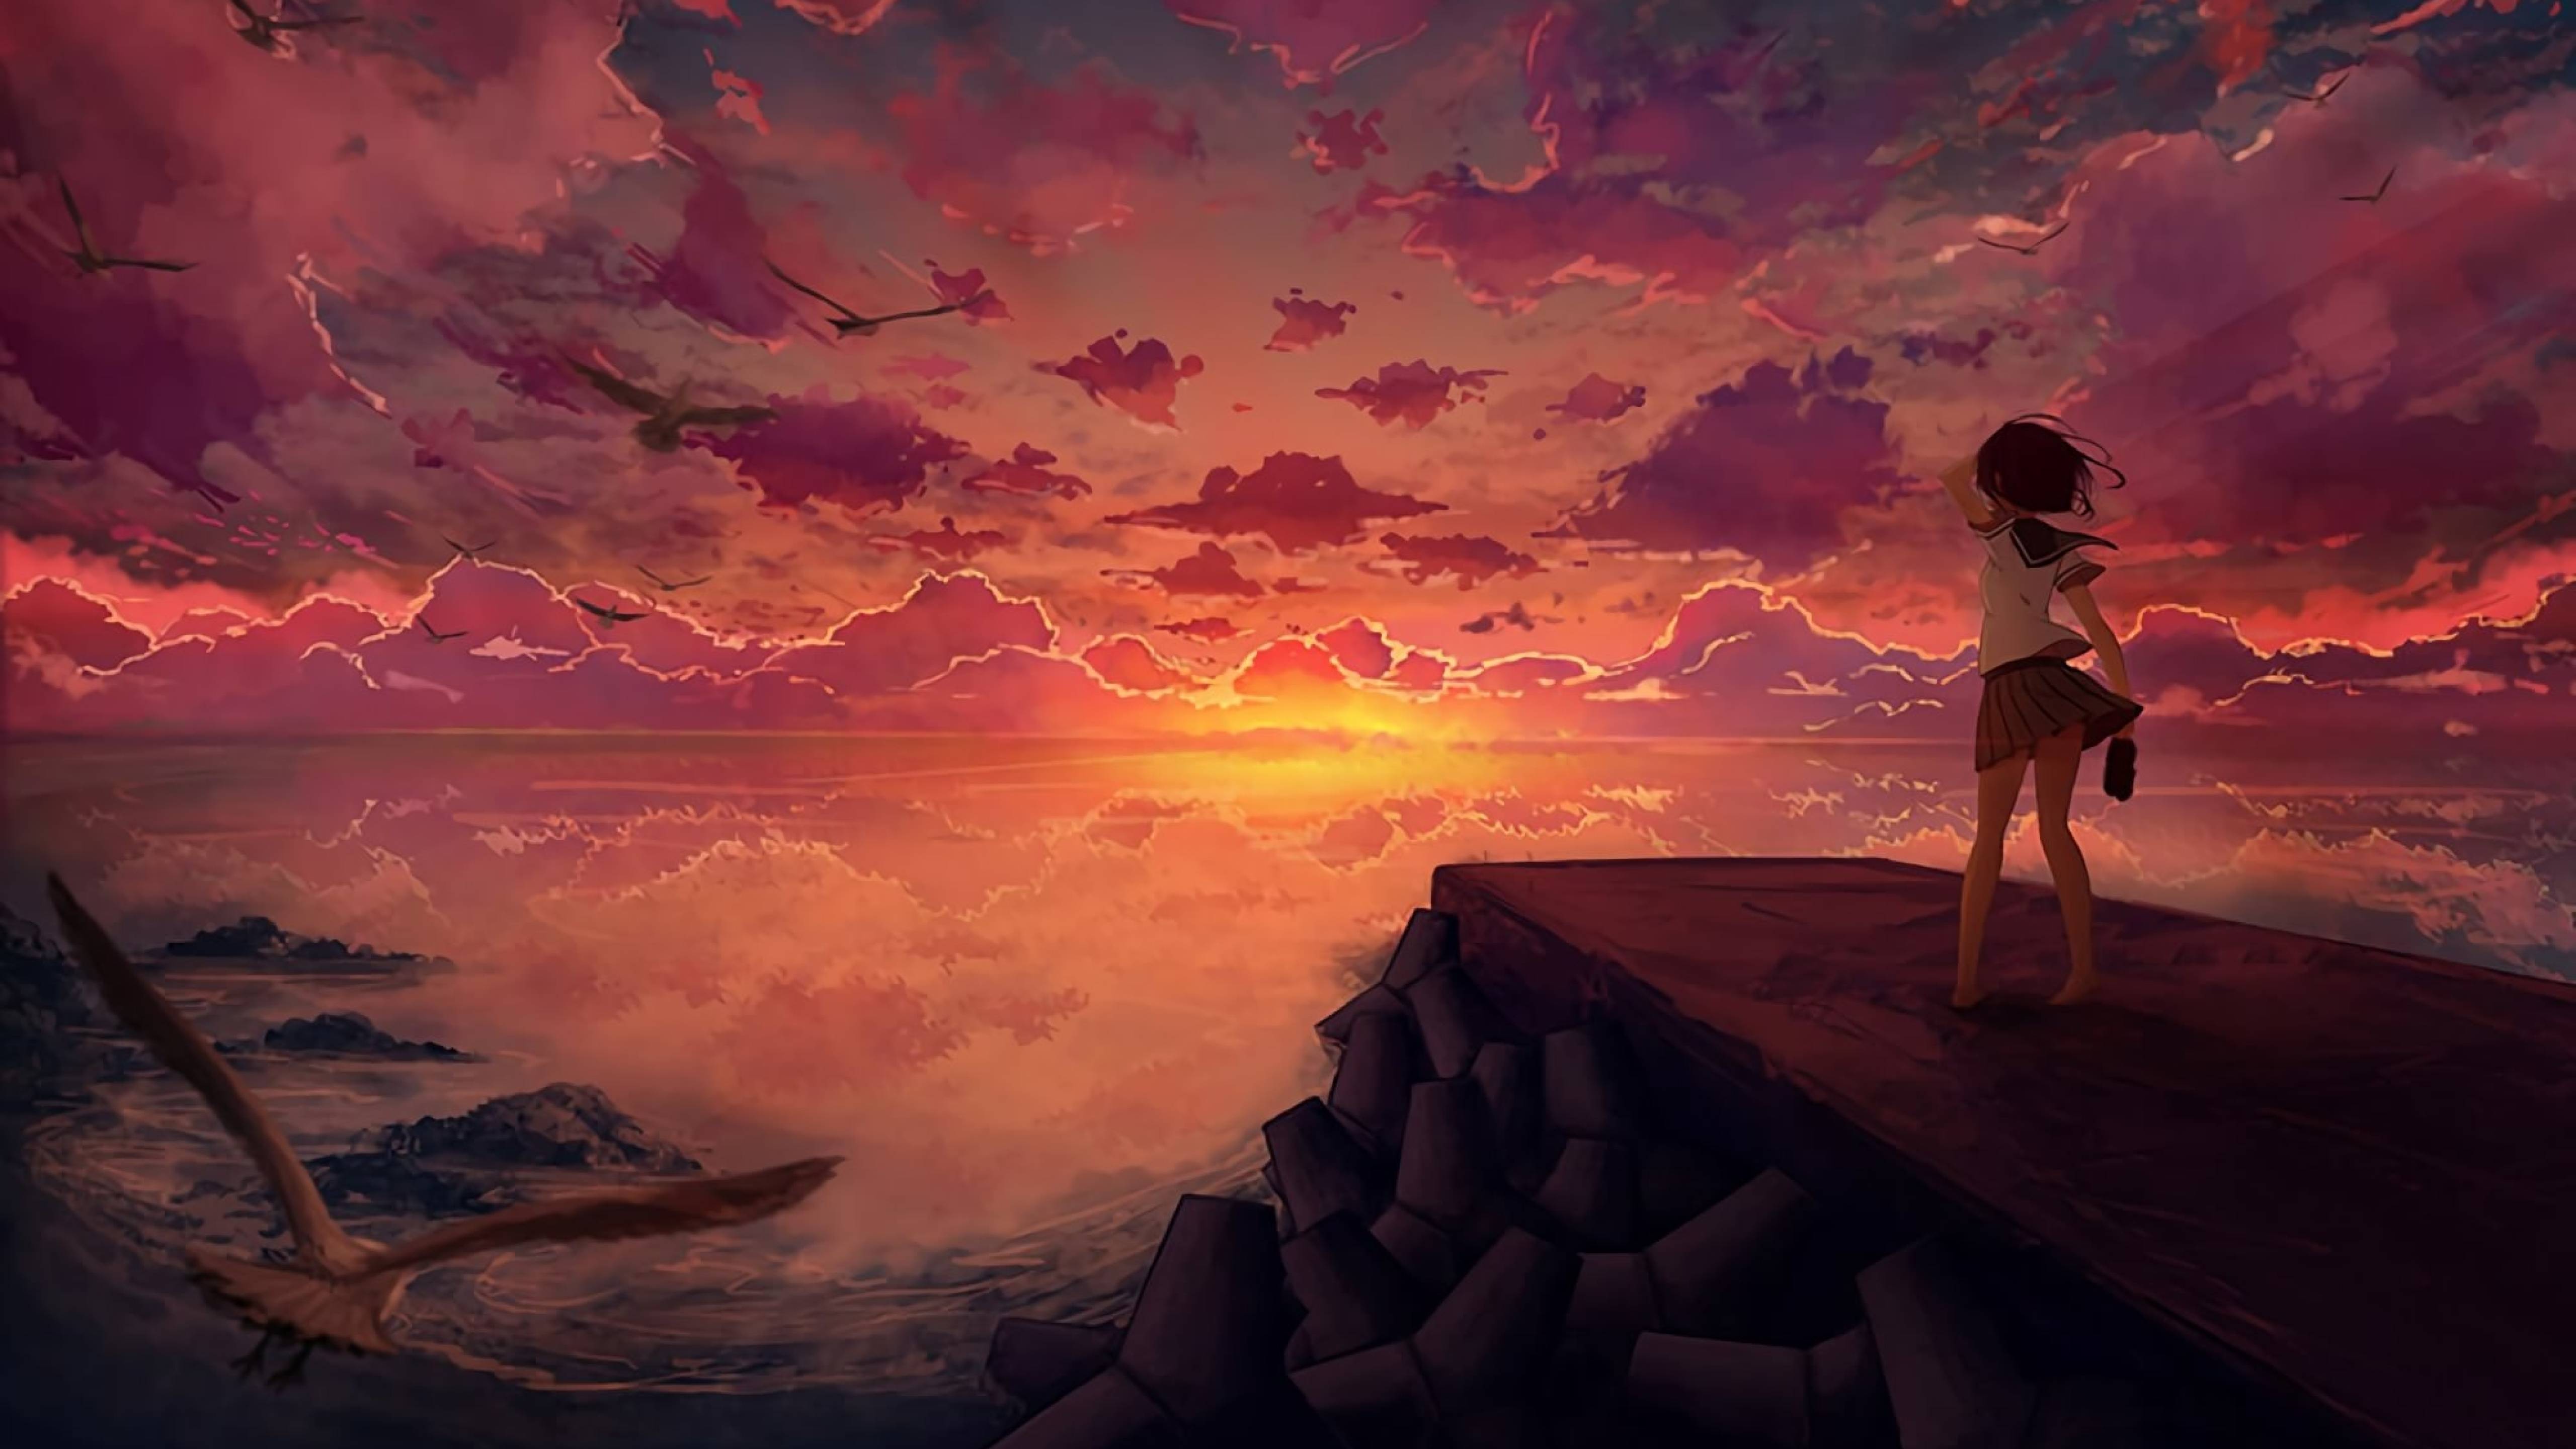 Anime Red Sky Wallpaper Free Anime Red Sky Background